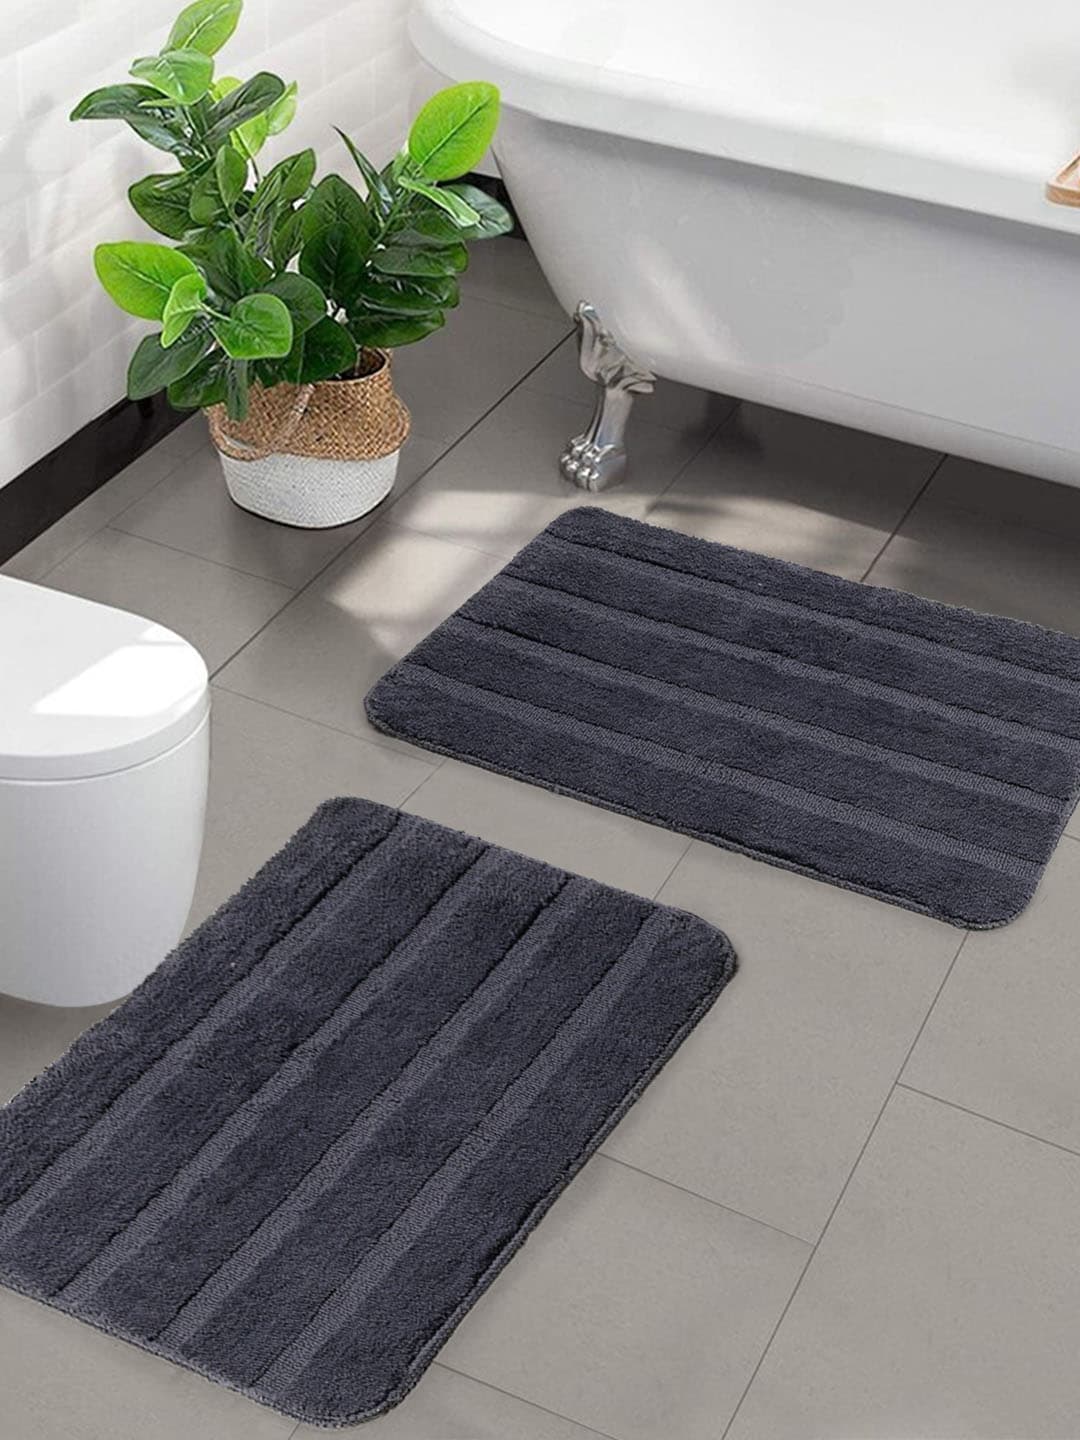 Saral Home Set of 2 Charcoal Grey Anti-Skid Bath Mats Price in India